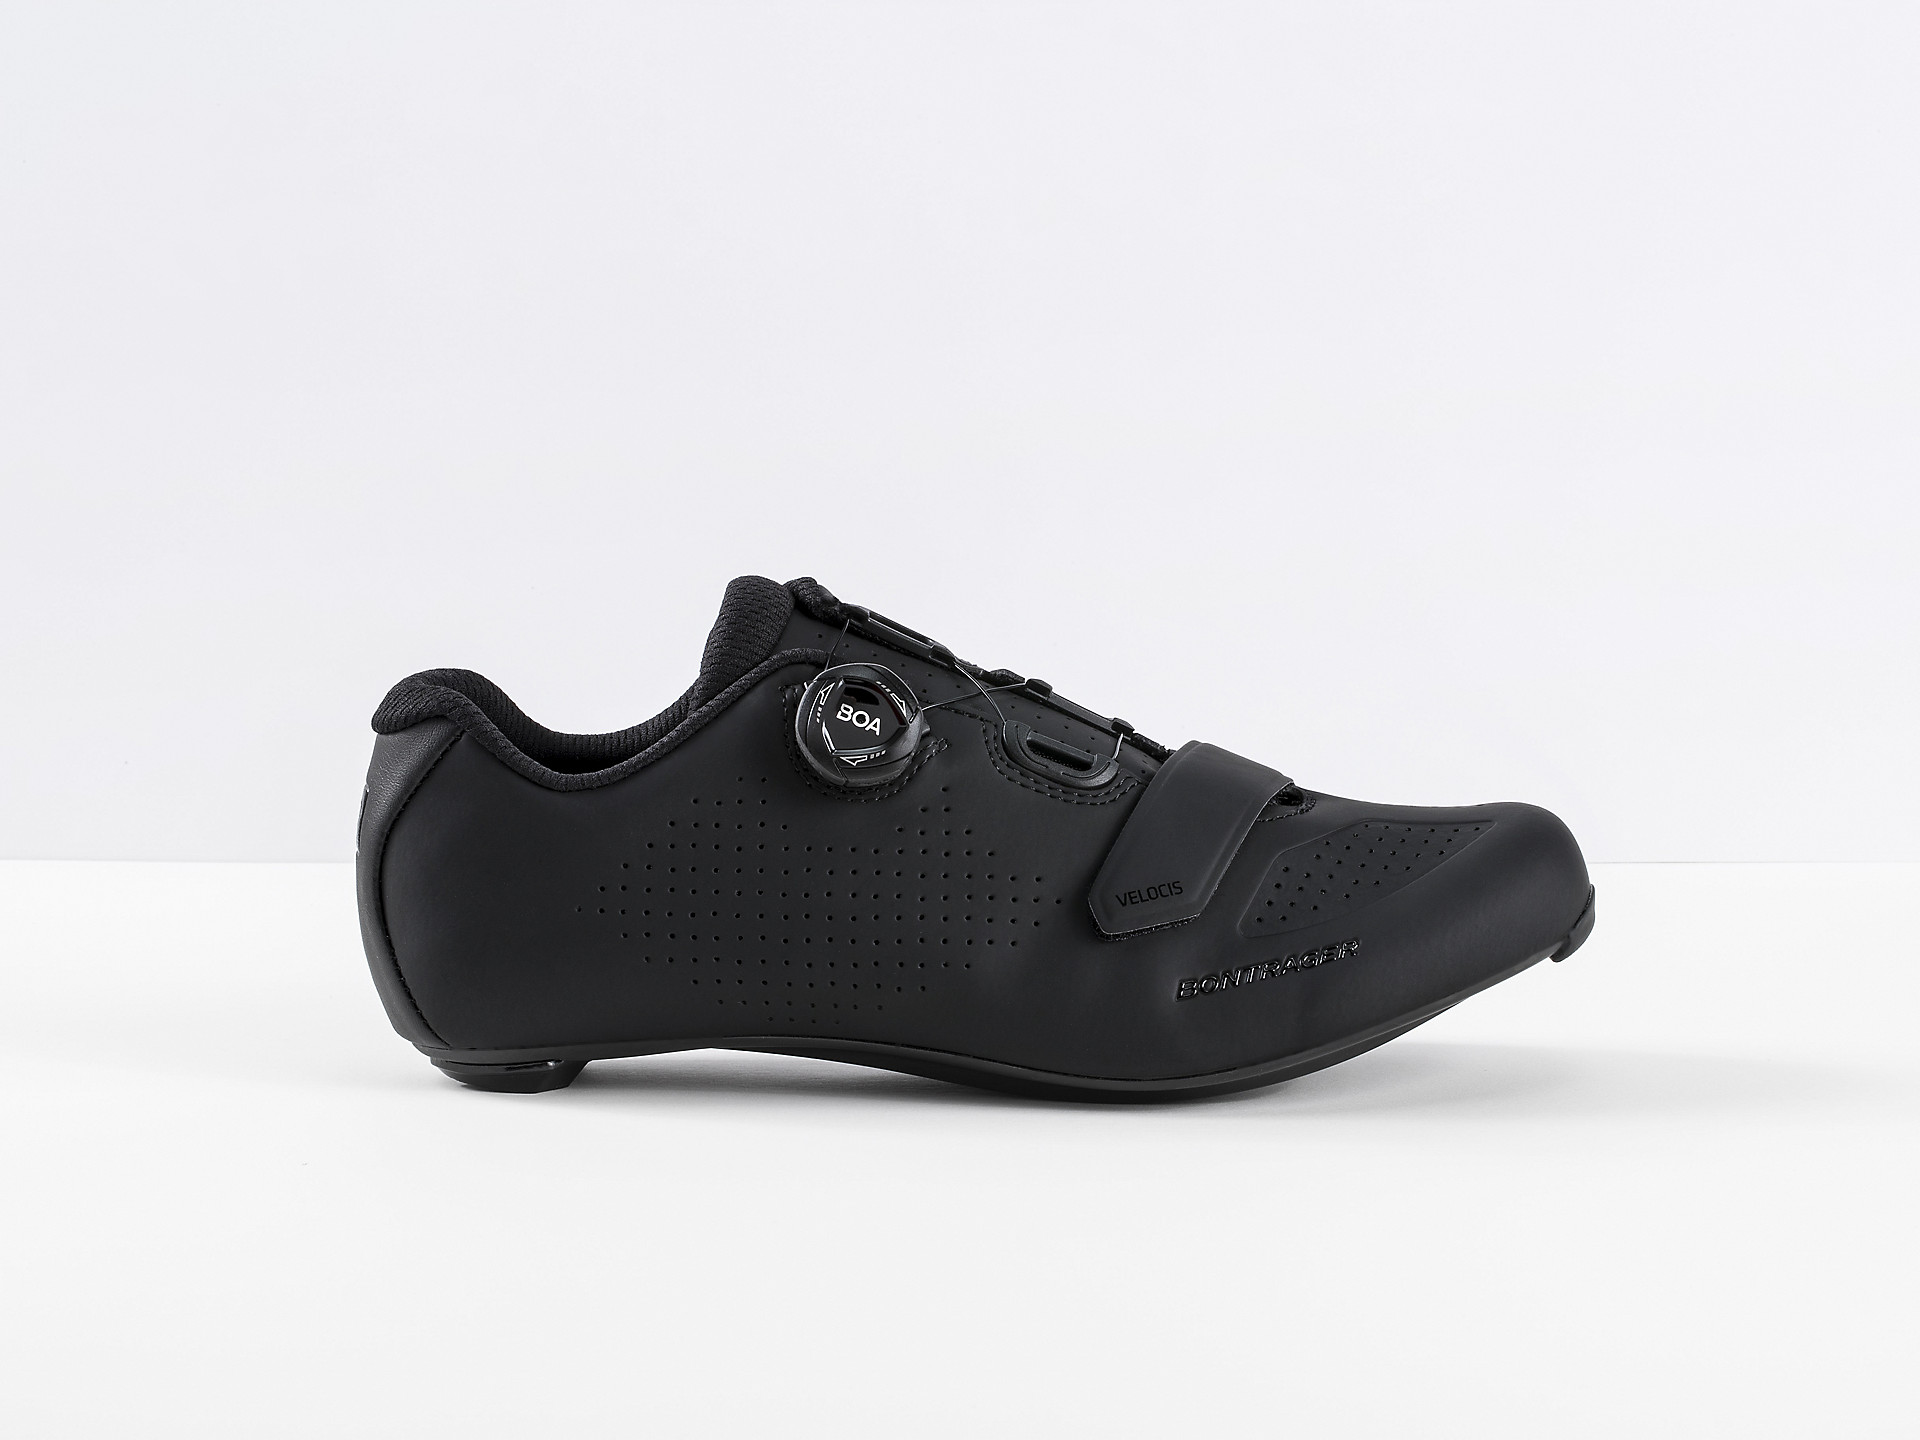 <a href="https://cycles-clement.be/product/bont-chaussures-velocis-46-black/">BONT CHAUSSURES VELOCIS  46 BLACK</a>